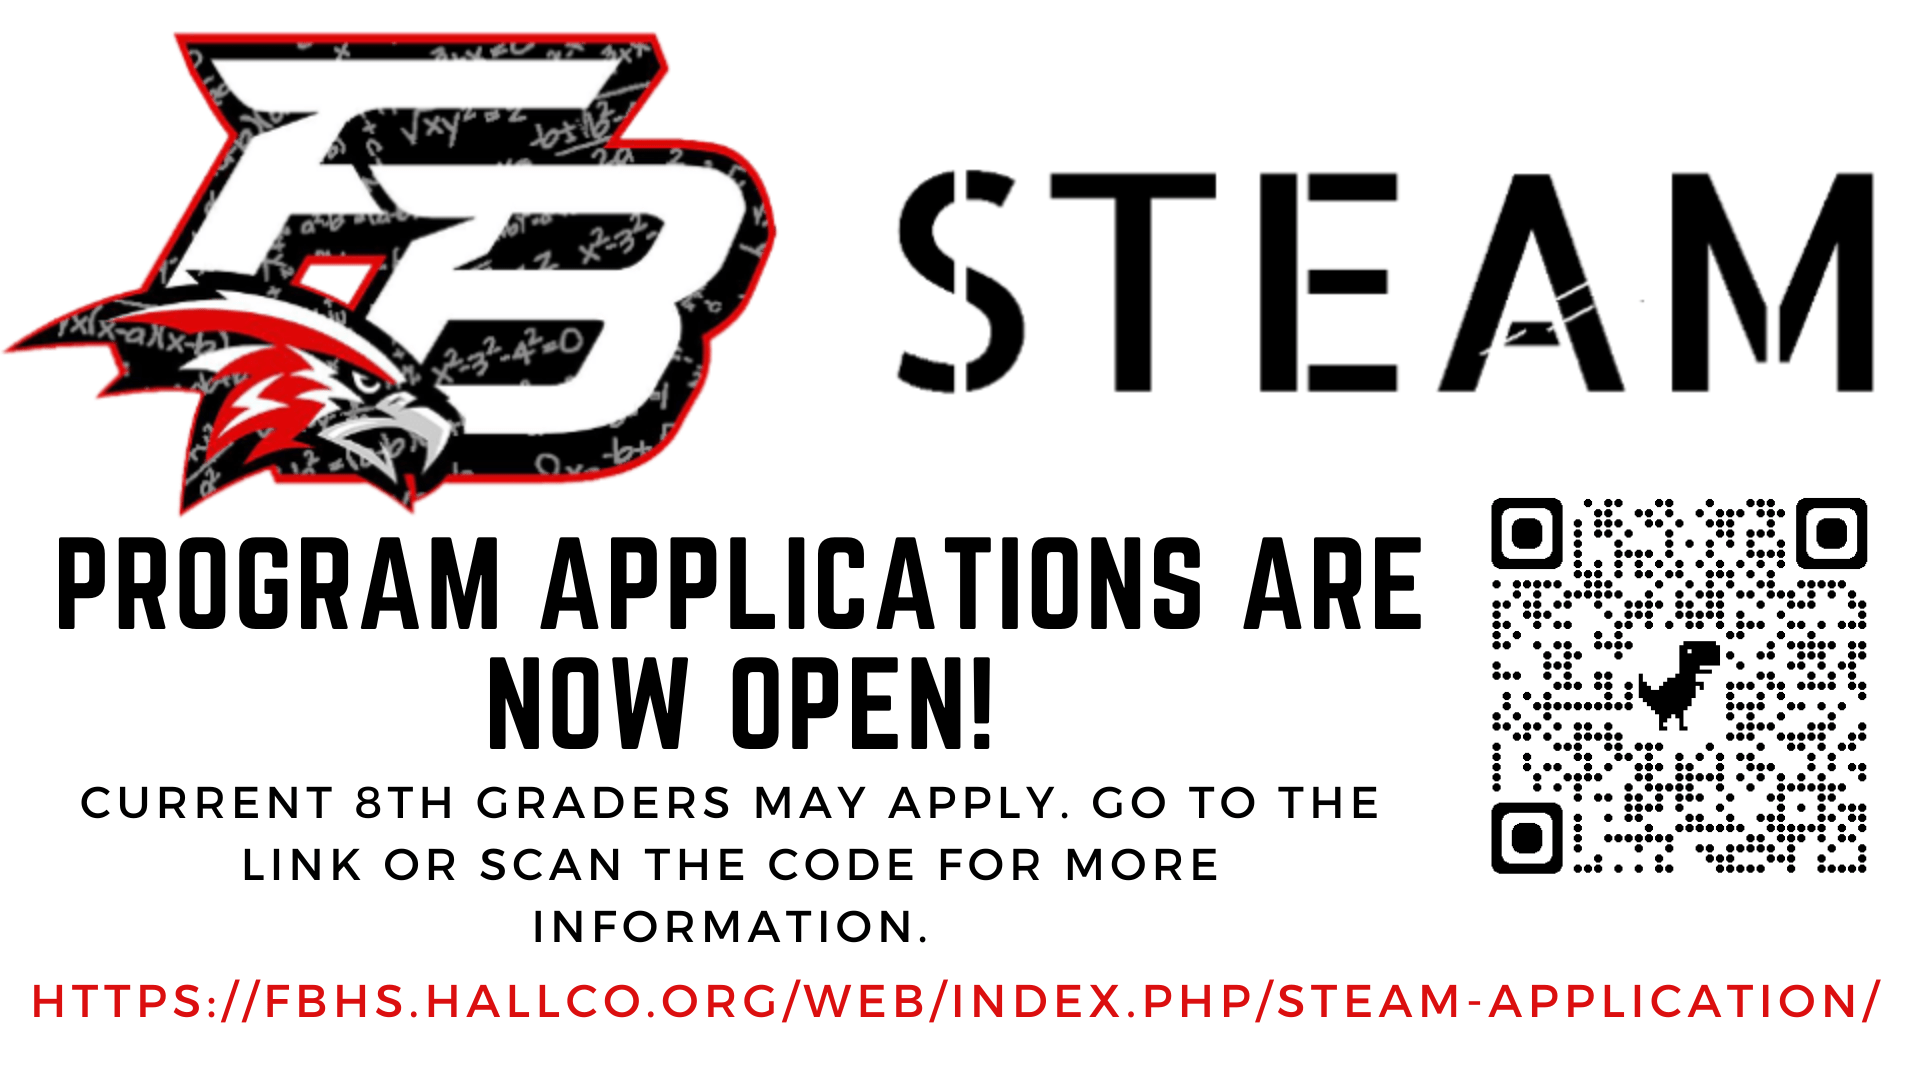 STEAM Program Applications are now open